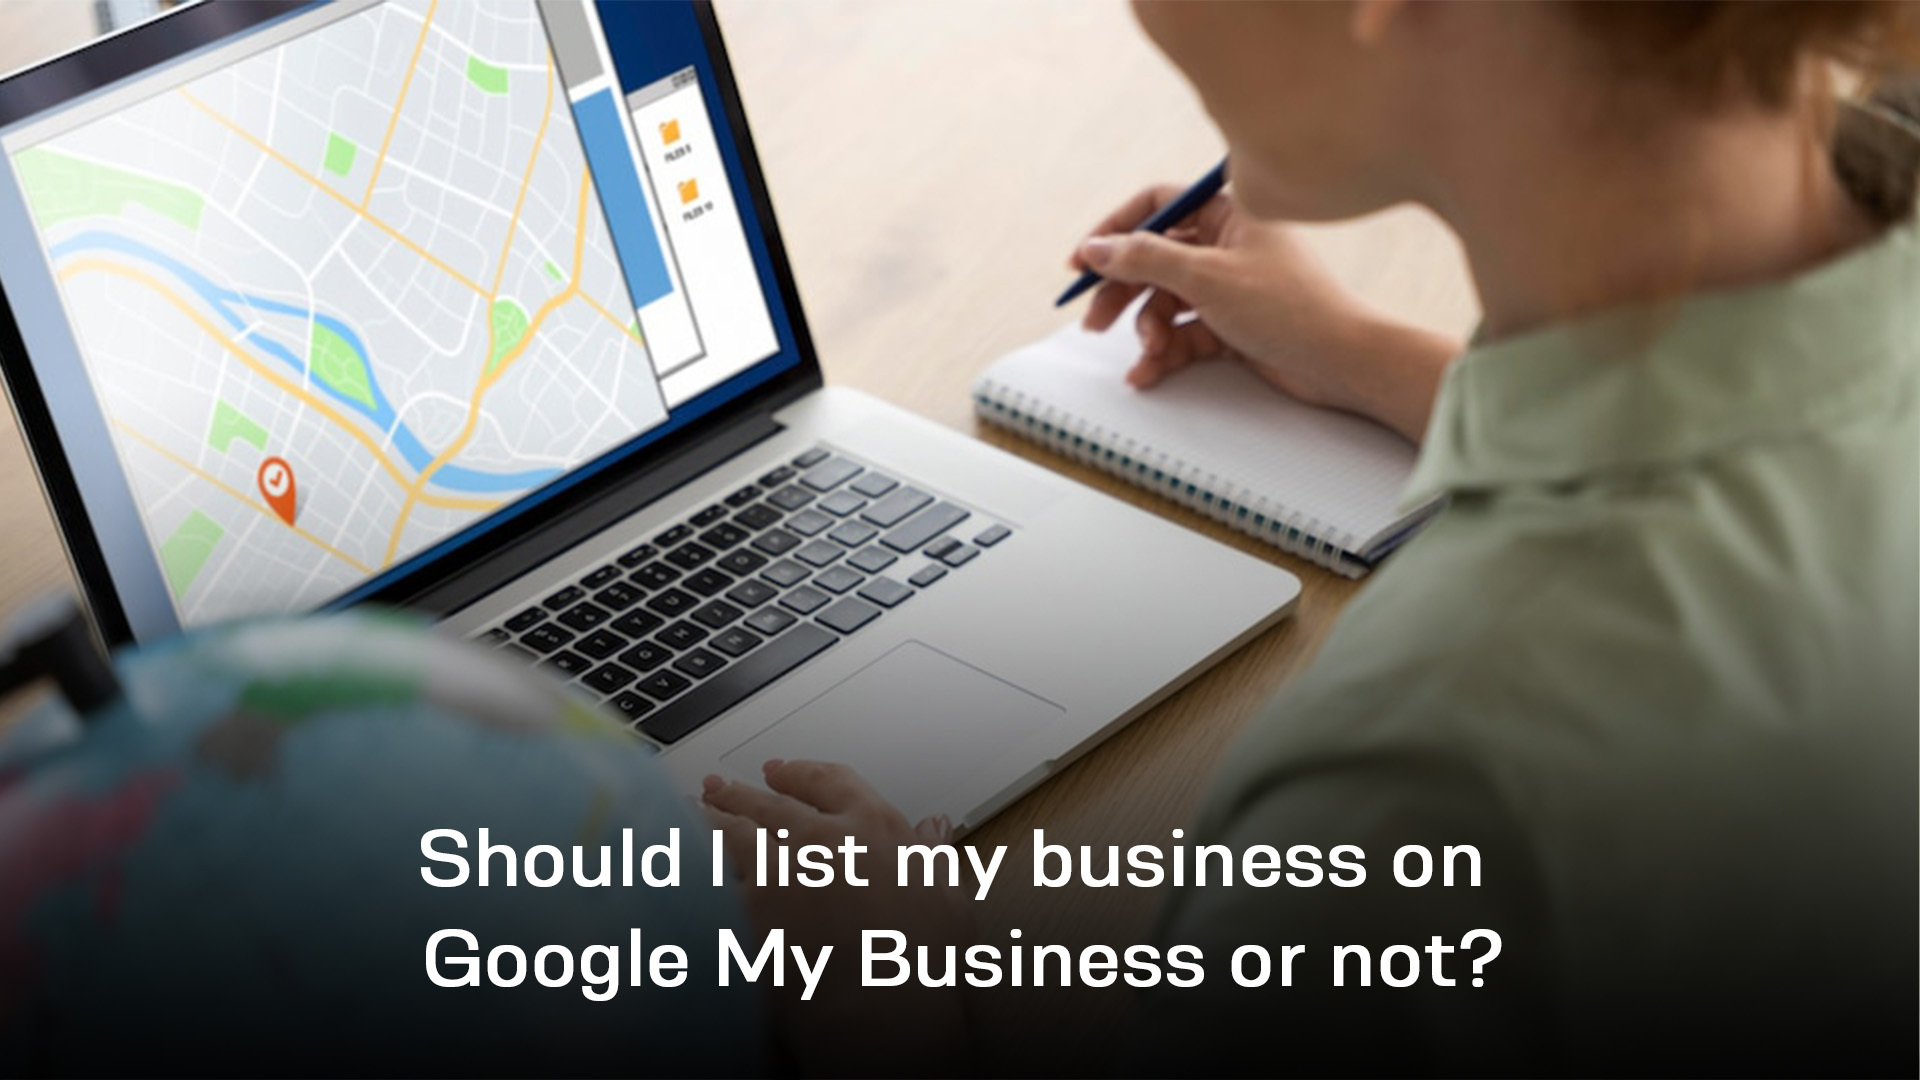 Should I list my business on Google My Business?